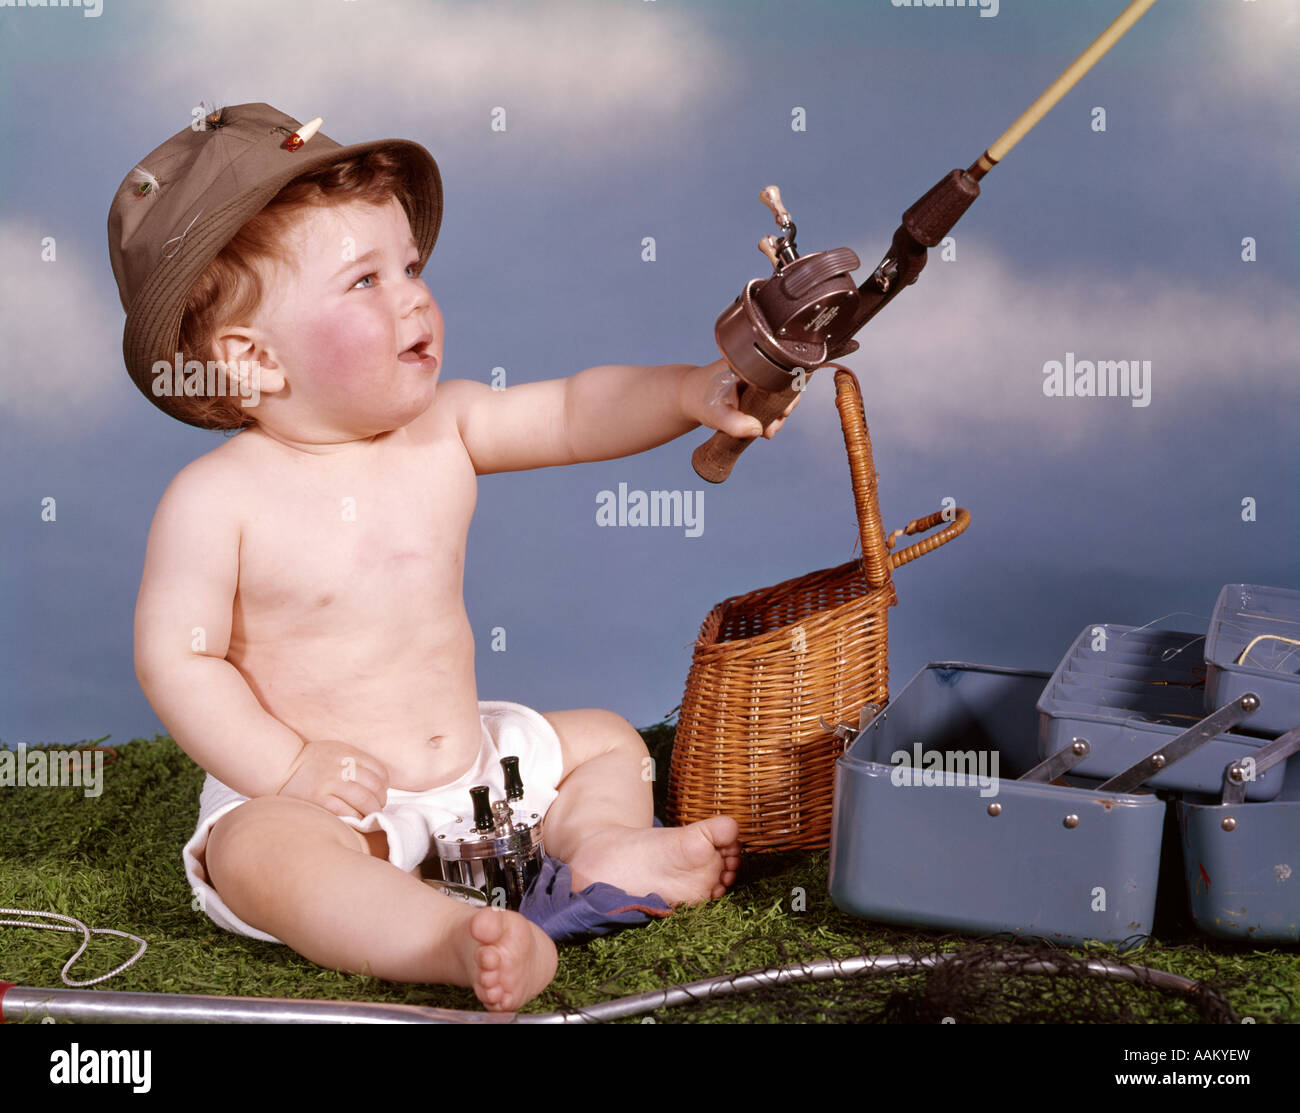 https://c8.alamy.com/comp/AAKYEW/baby-with-fishing-hat-and-gear-holding-fishing-rod-studio-tackle-box-AAKYEW.jpg